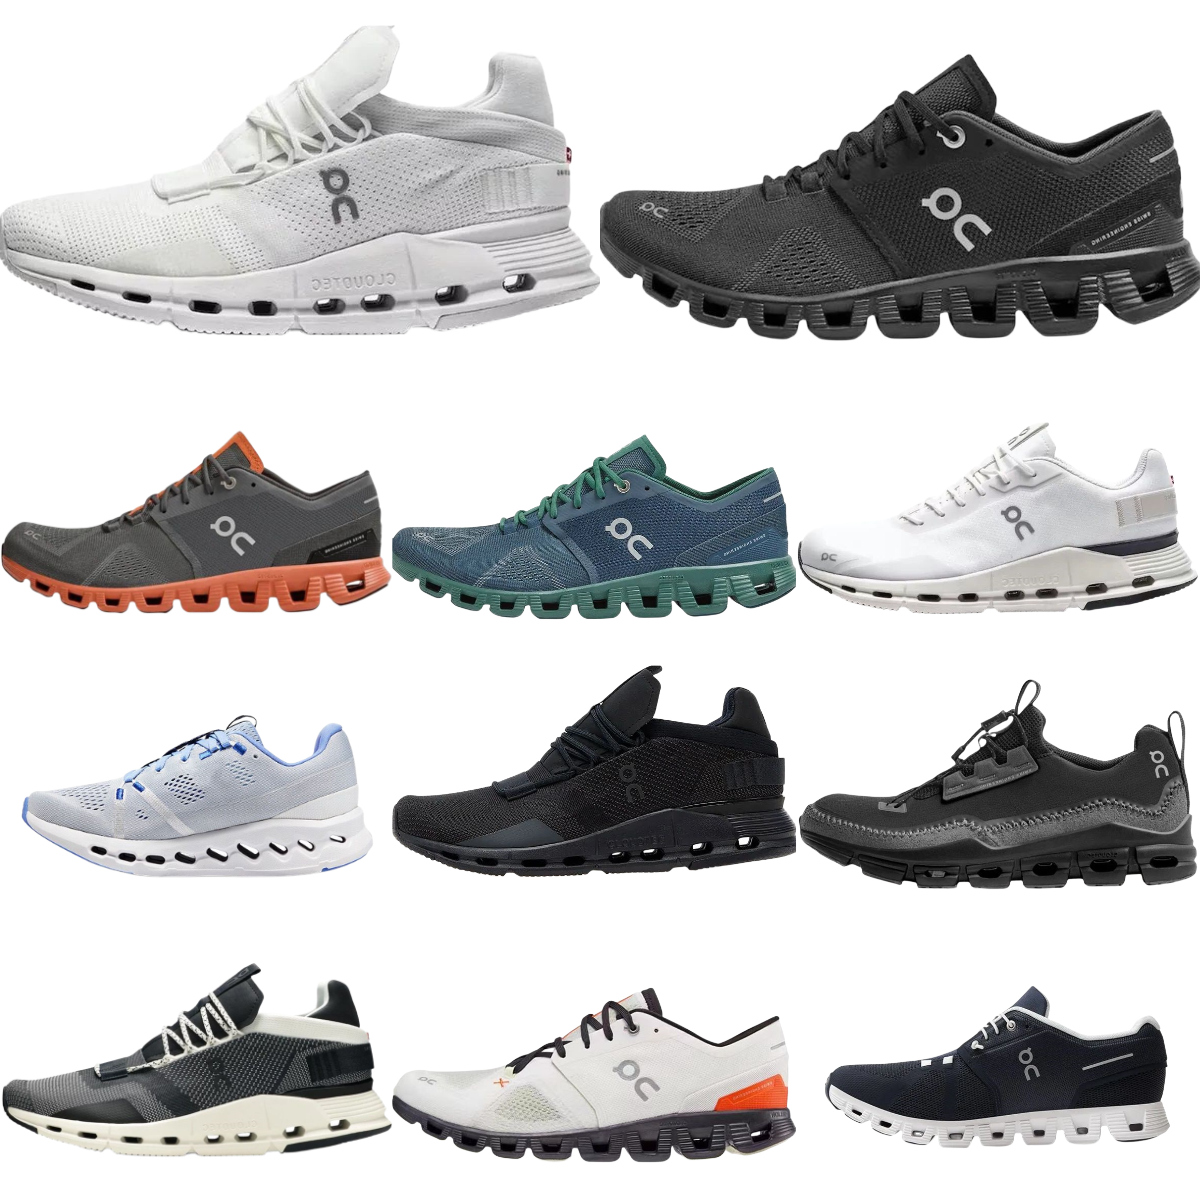 

On New Running Cloud 5 X Casual Shoes Federer Mens Nova Cloudnova Form X 3 All Black White Trainers Workout Cross Cloudaway Runner Cloudmonster Women Sports Sneakers, Please contact us